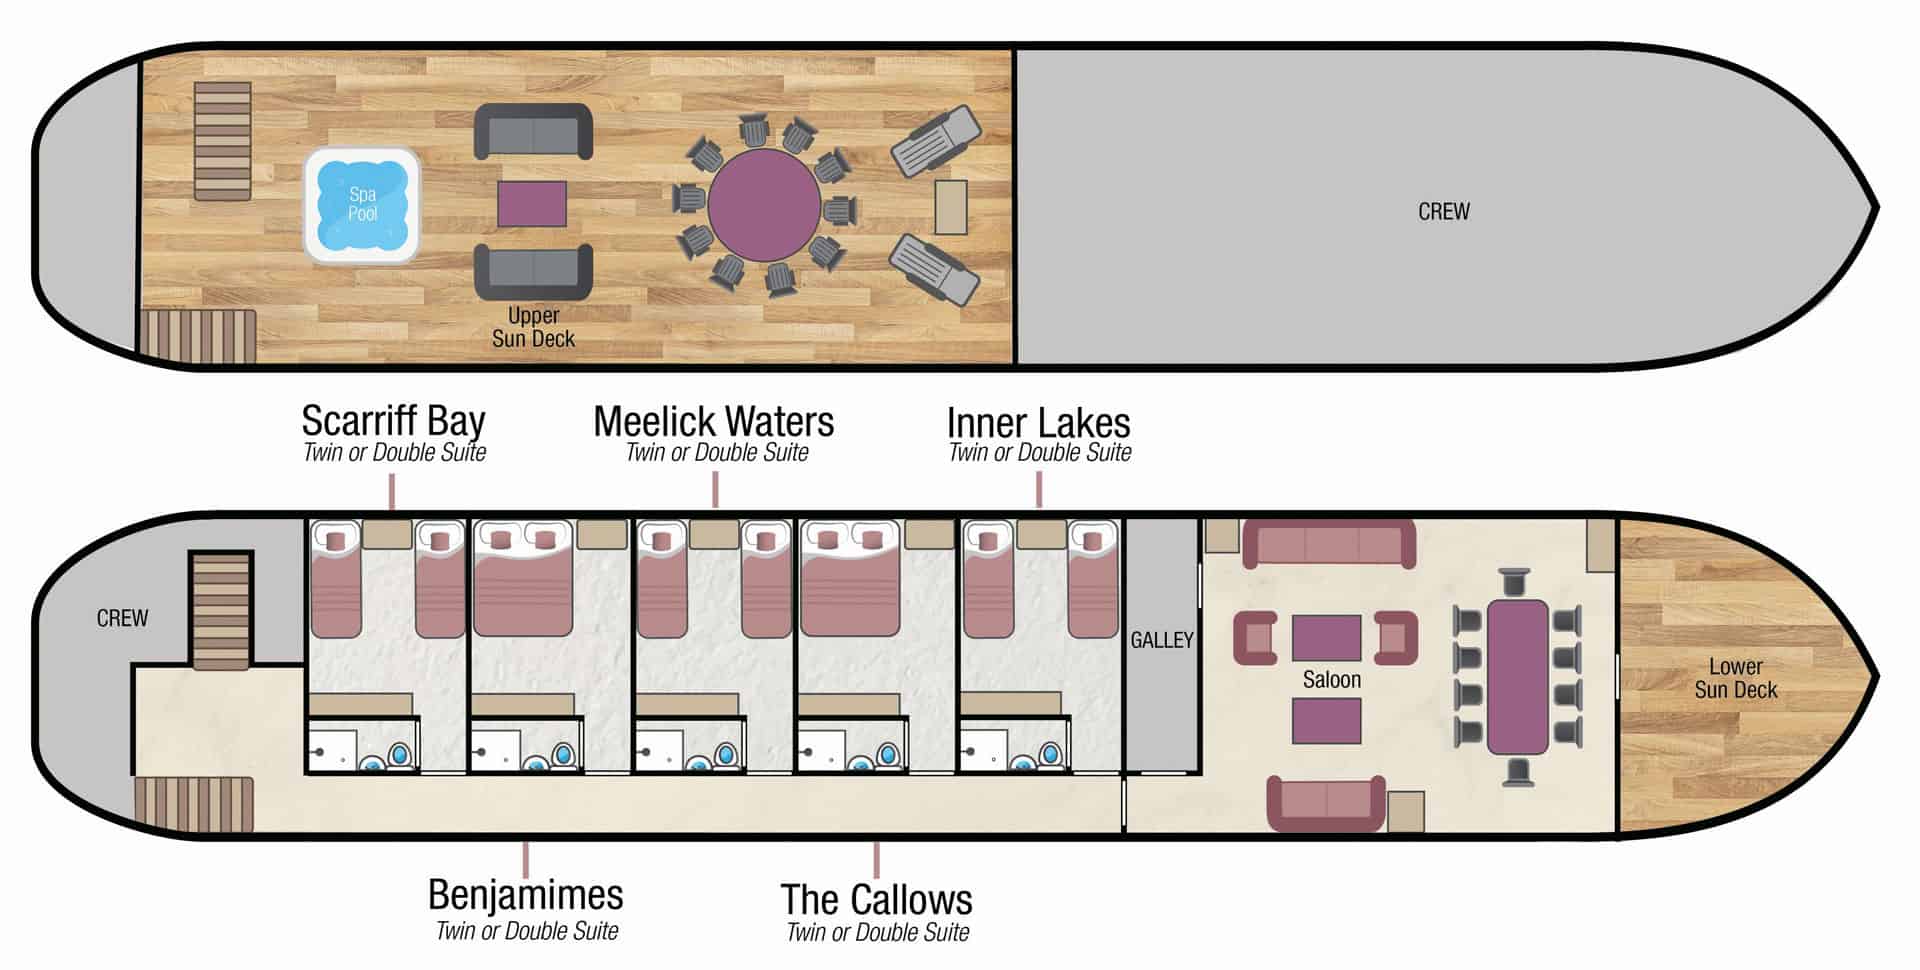 Deck plan of Shannon Princess barge, with 2 passenger decks including 4 cabins, dining table, saloon & sun deck with hot tub.